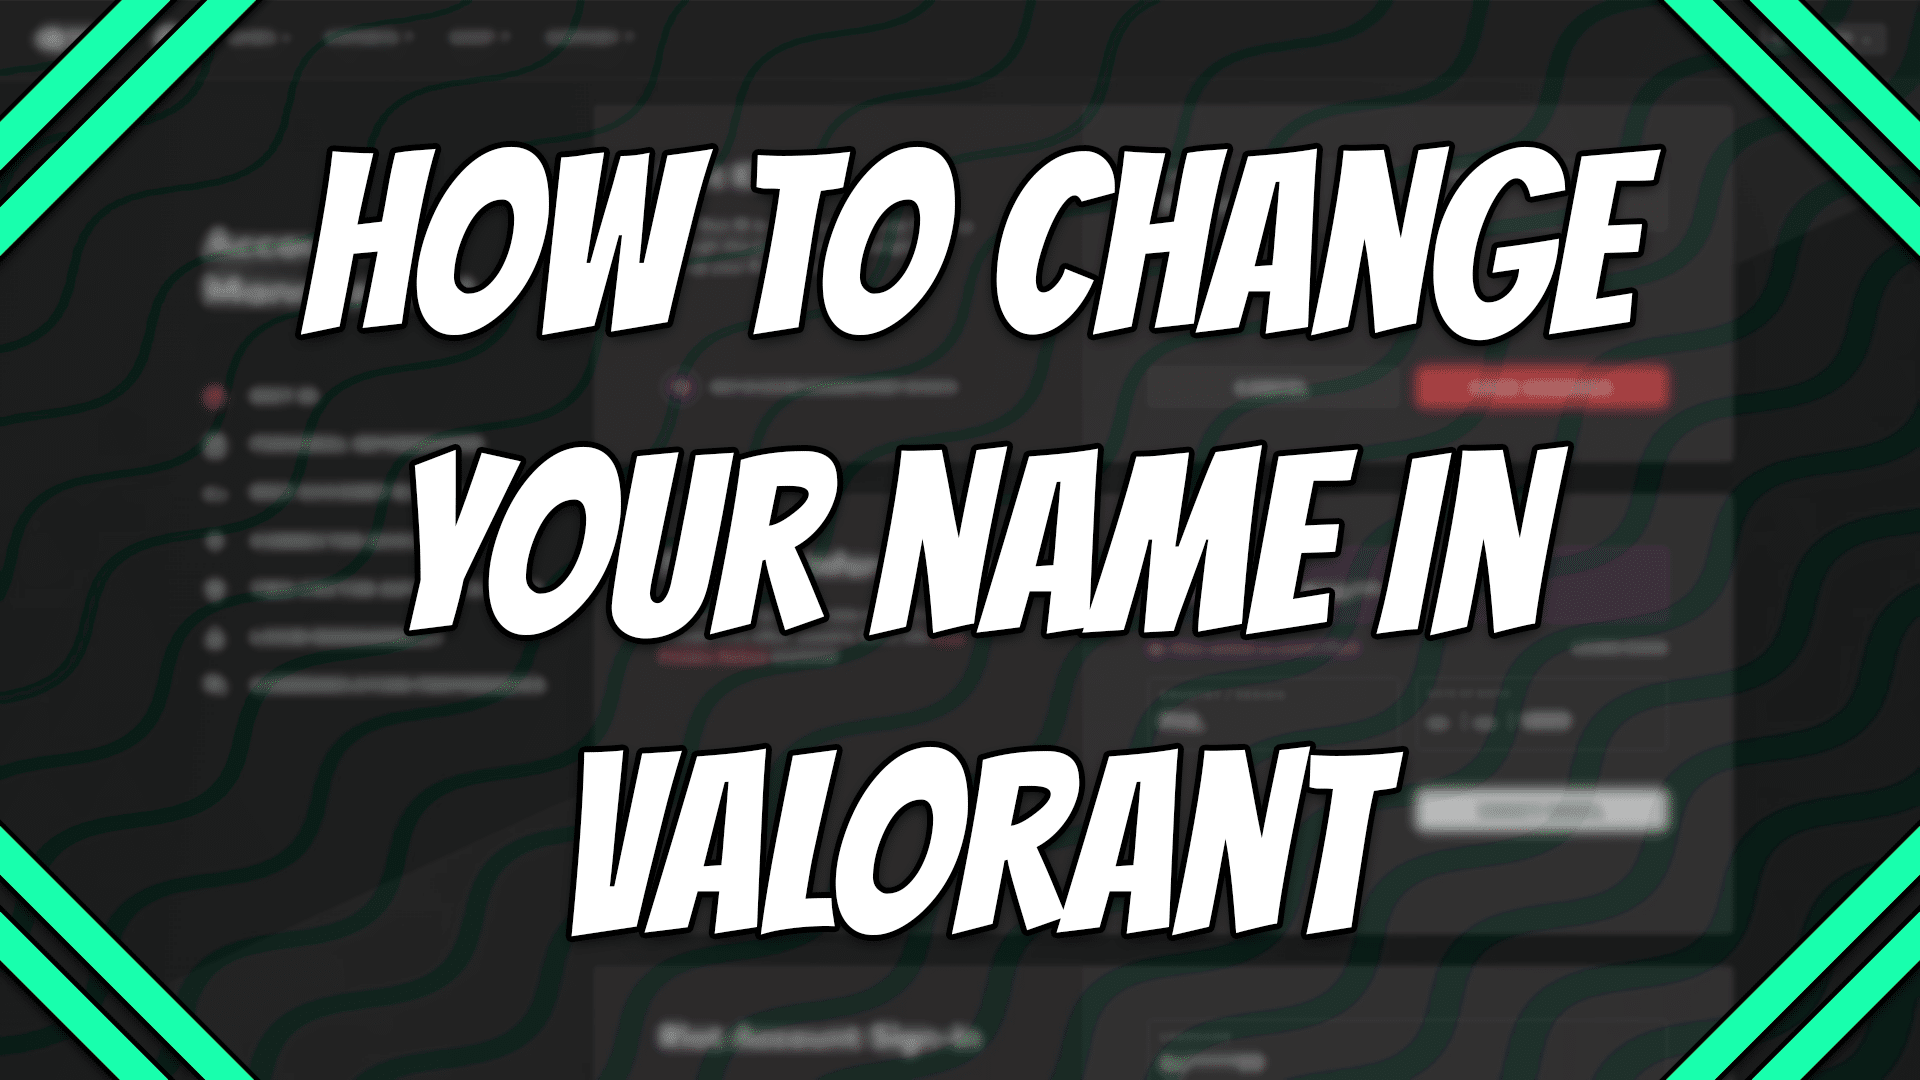 How to change the Display name in Valorant